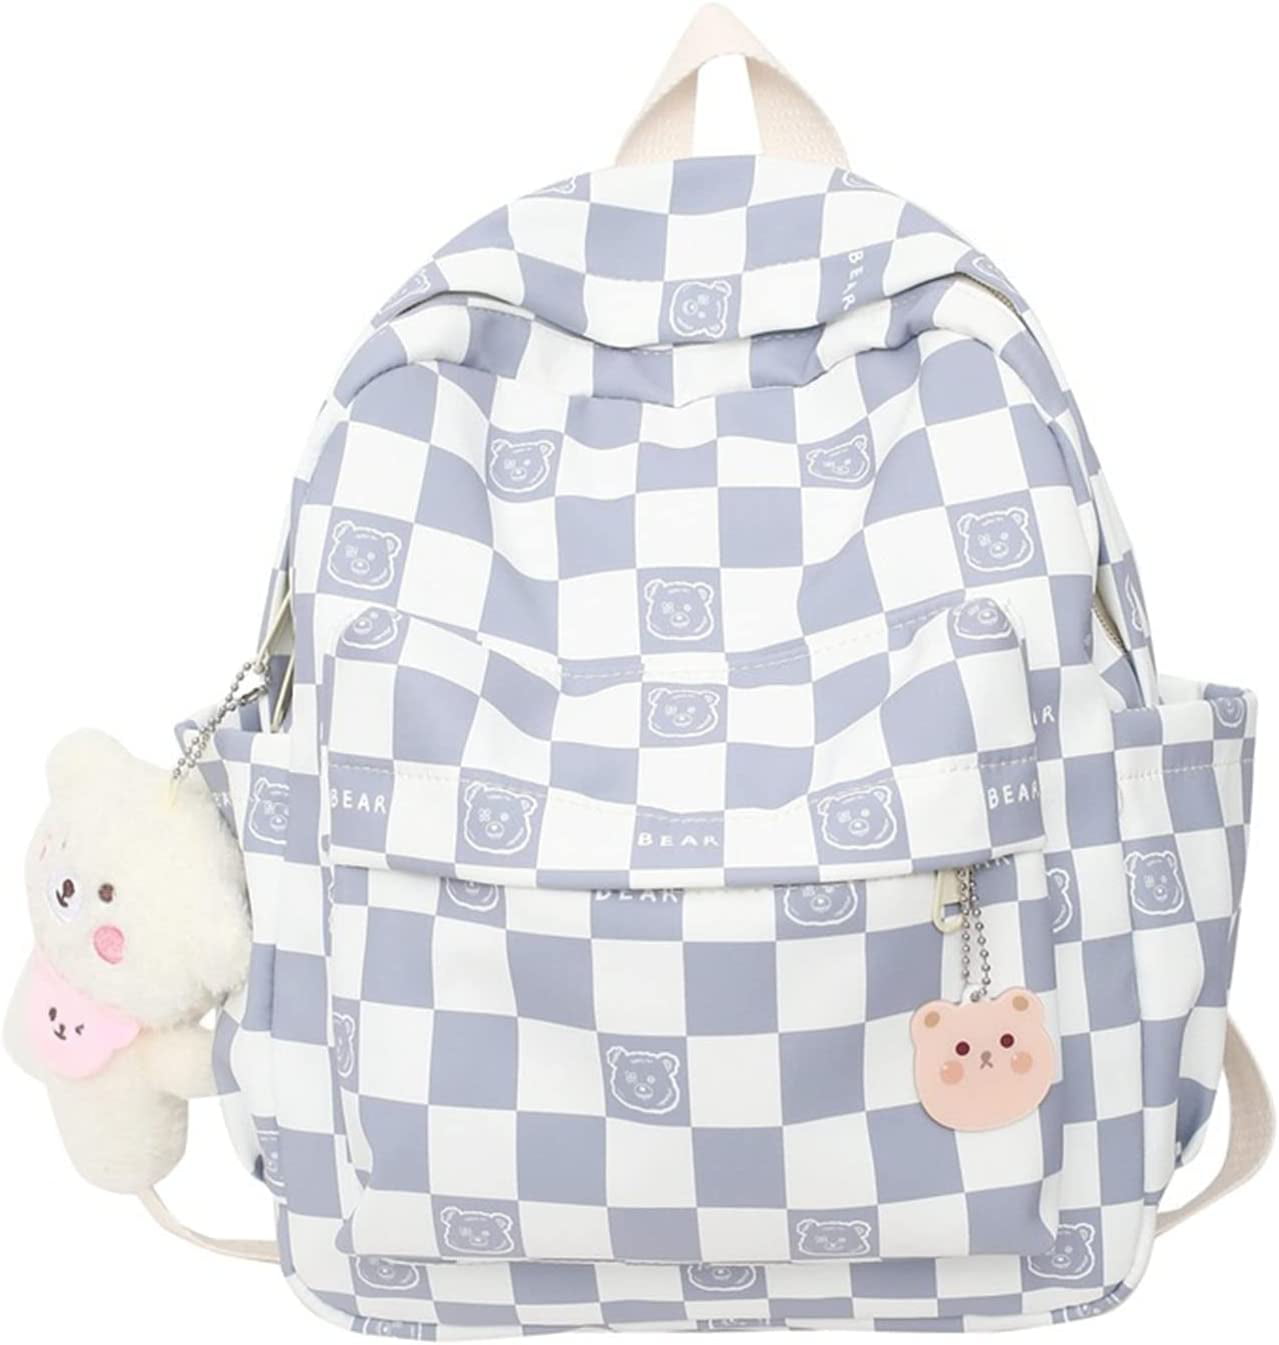  MININAI Cute Checkered Backpack Fit 15.6 Inch Laptop